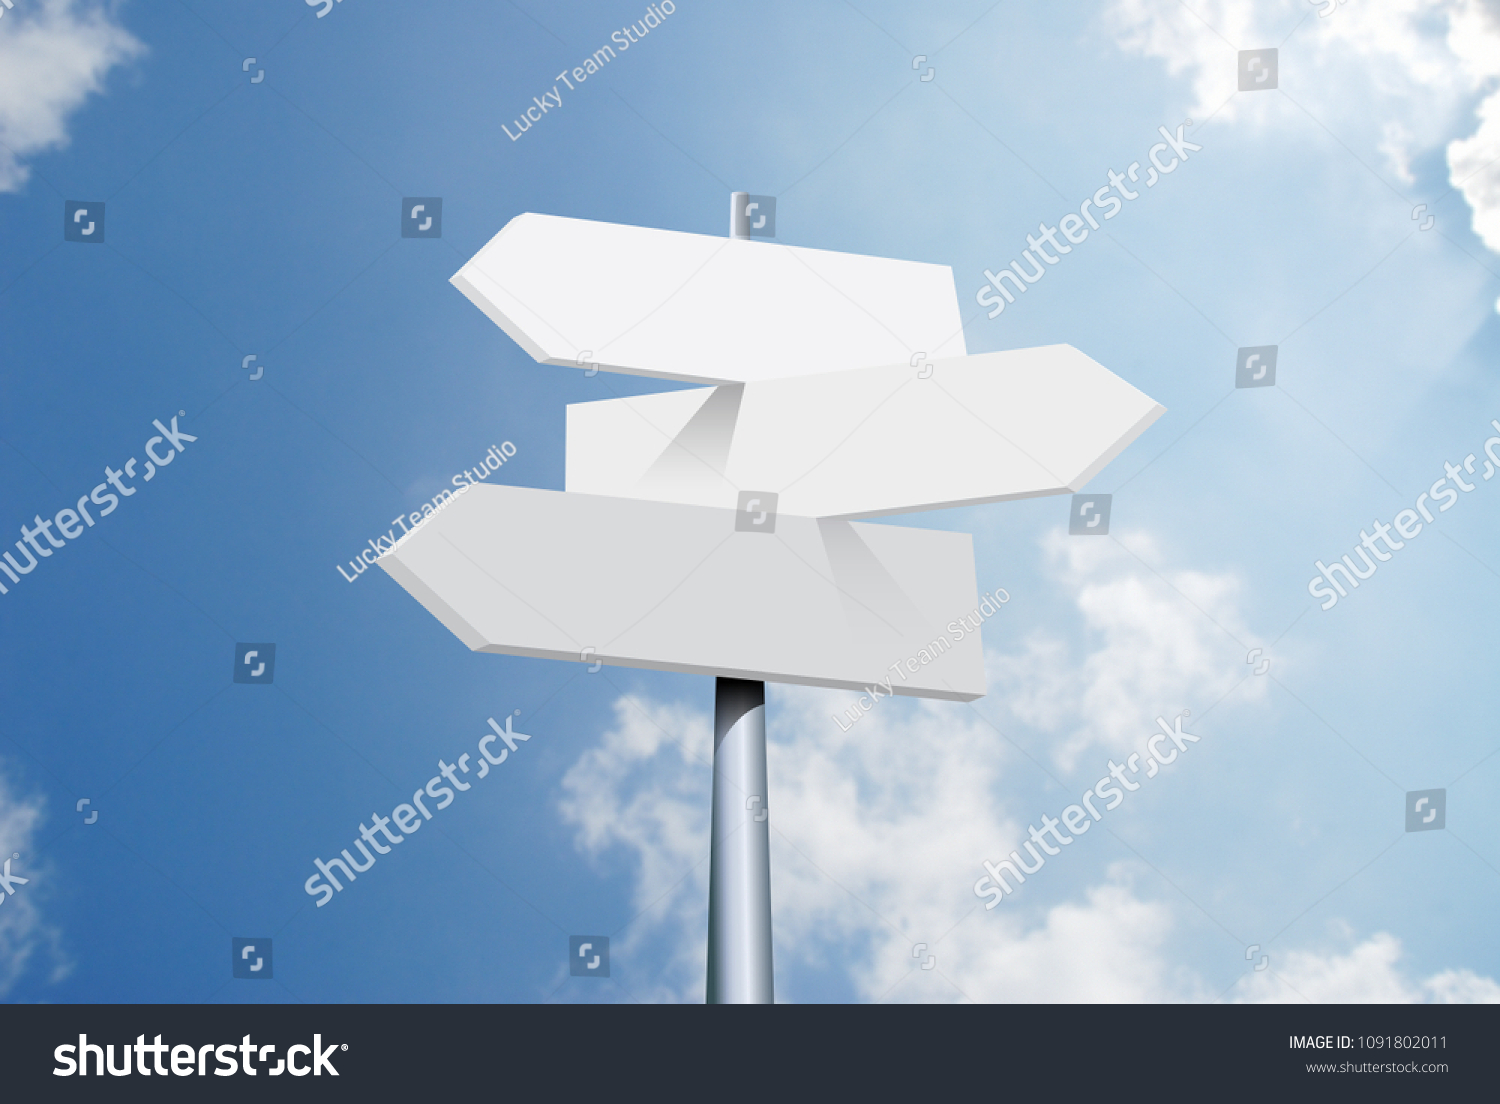 travel destinations options. Direction road sign with arrows on sky and clouds #1091802011